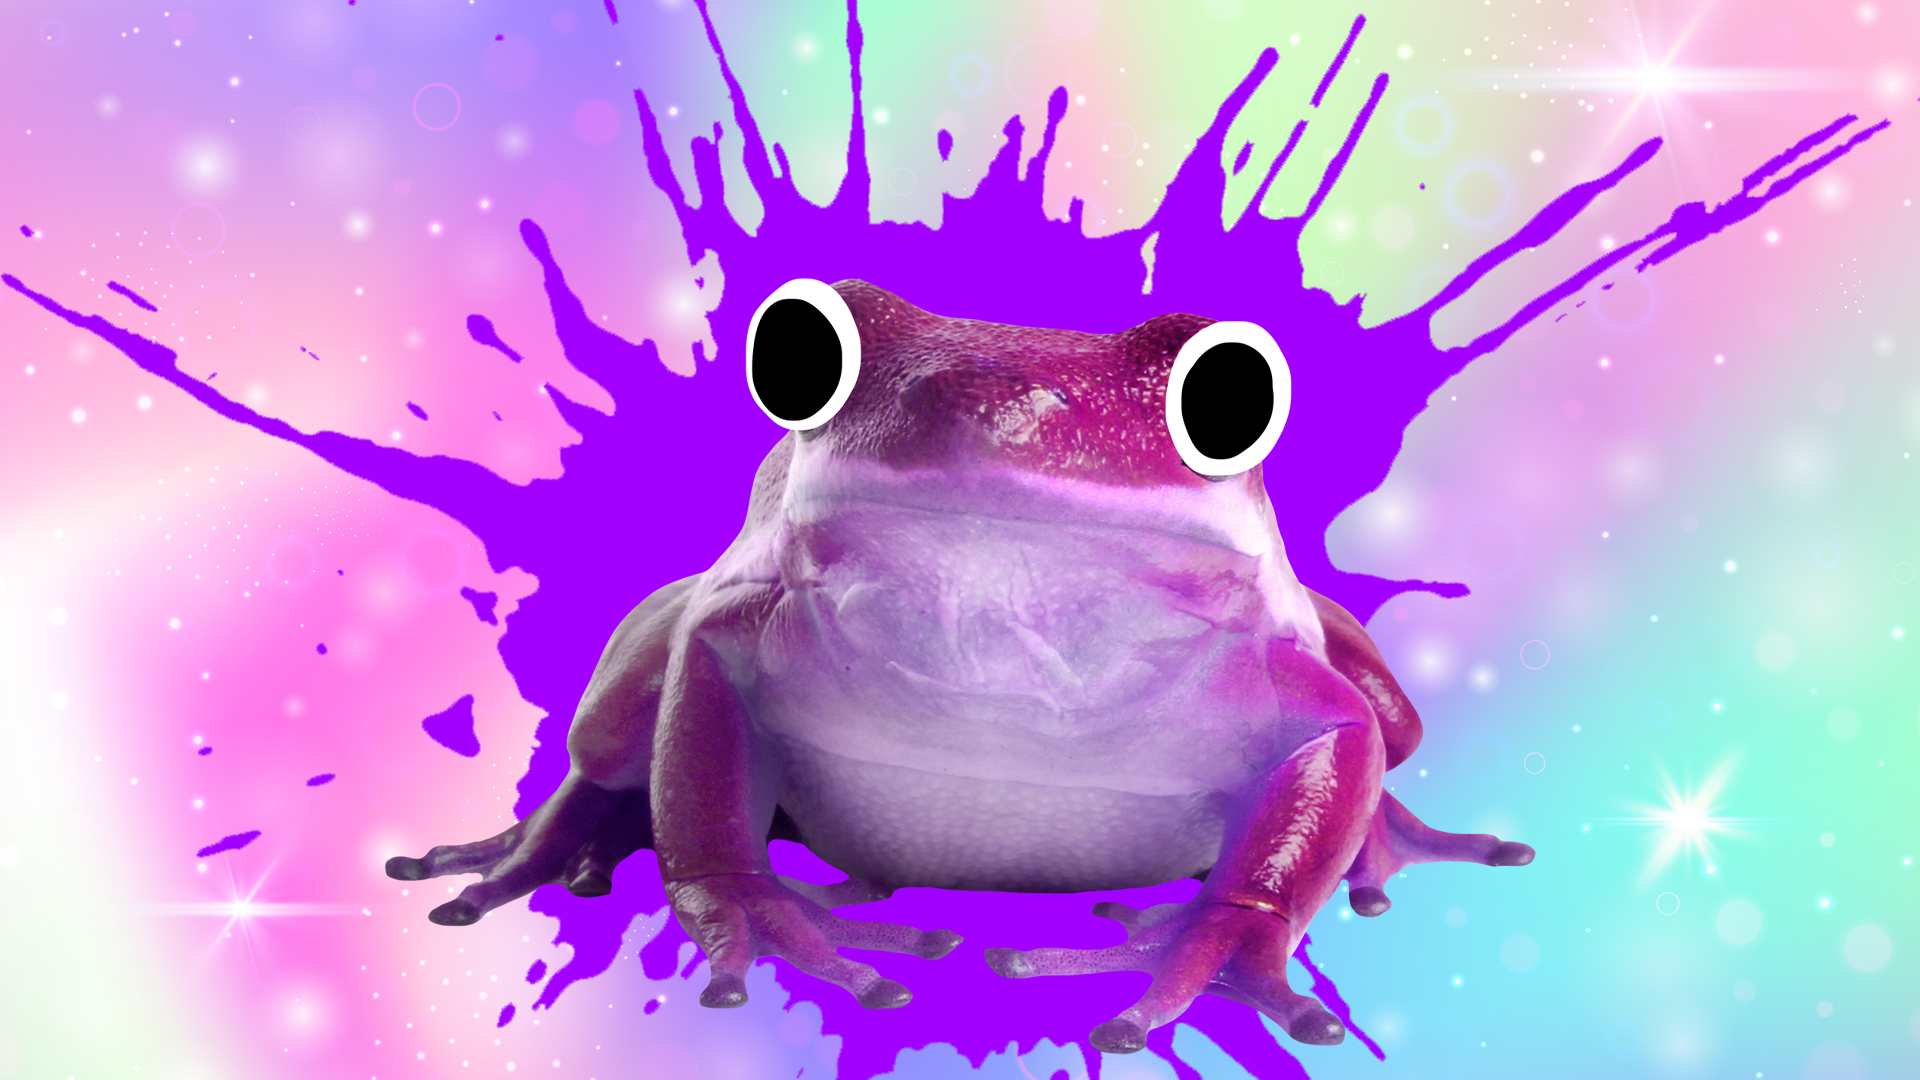 A purple frog on a sparkly background